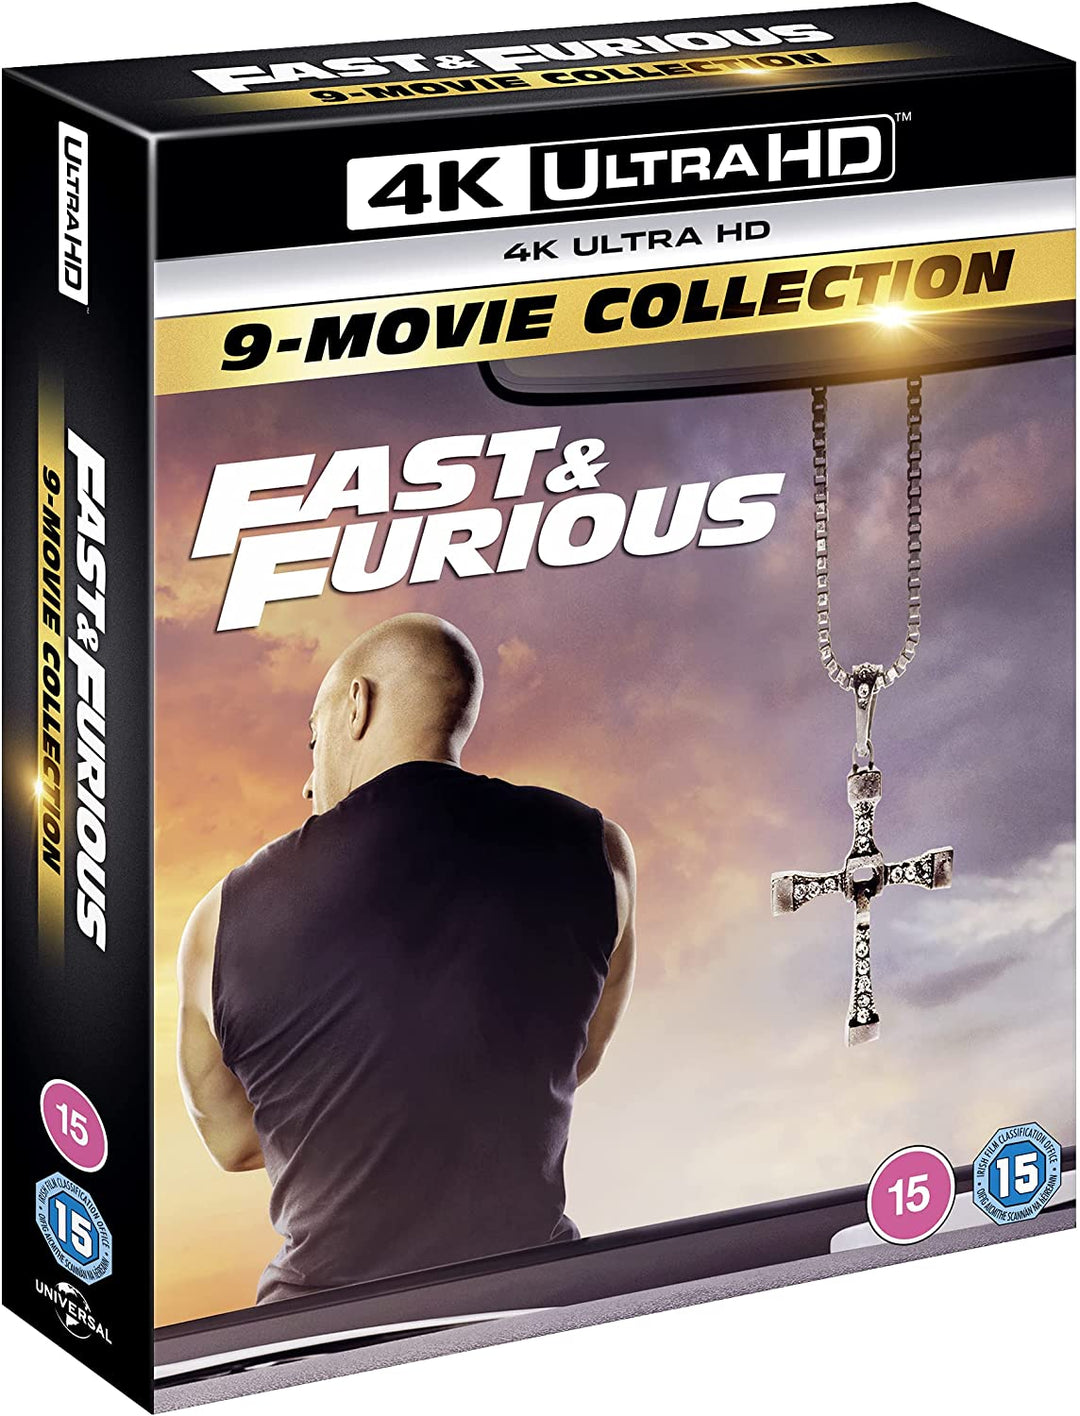 Fast &amp; Furious 1-9 Film Collection [4K Ultra HD] [2021] [Region Free] – Action/Drama [Blu-ray]